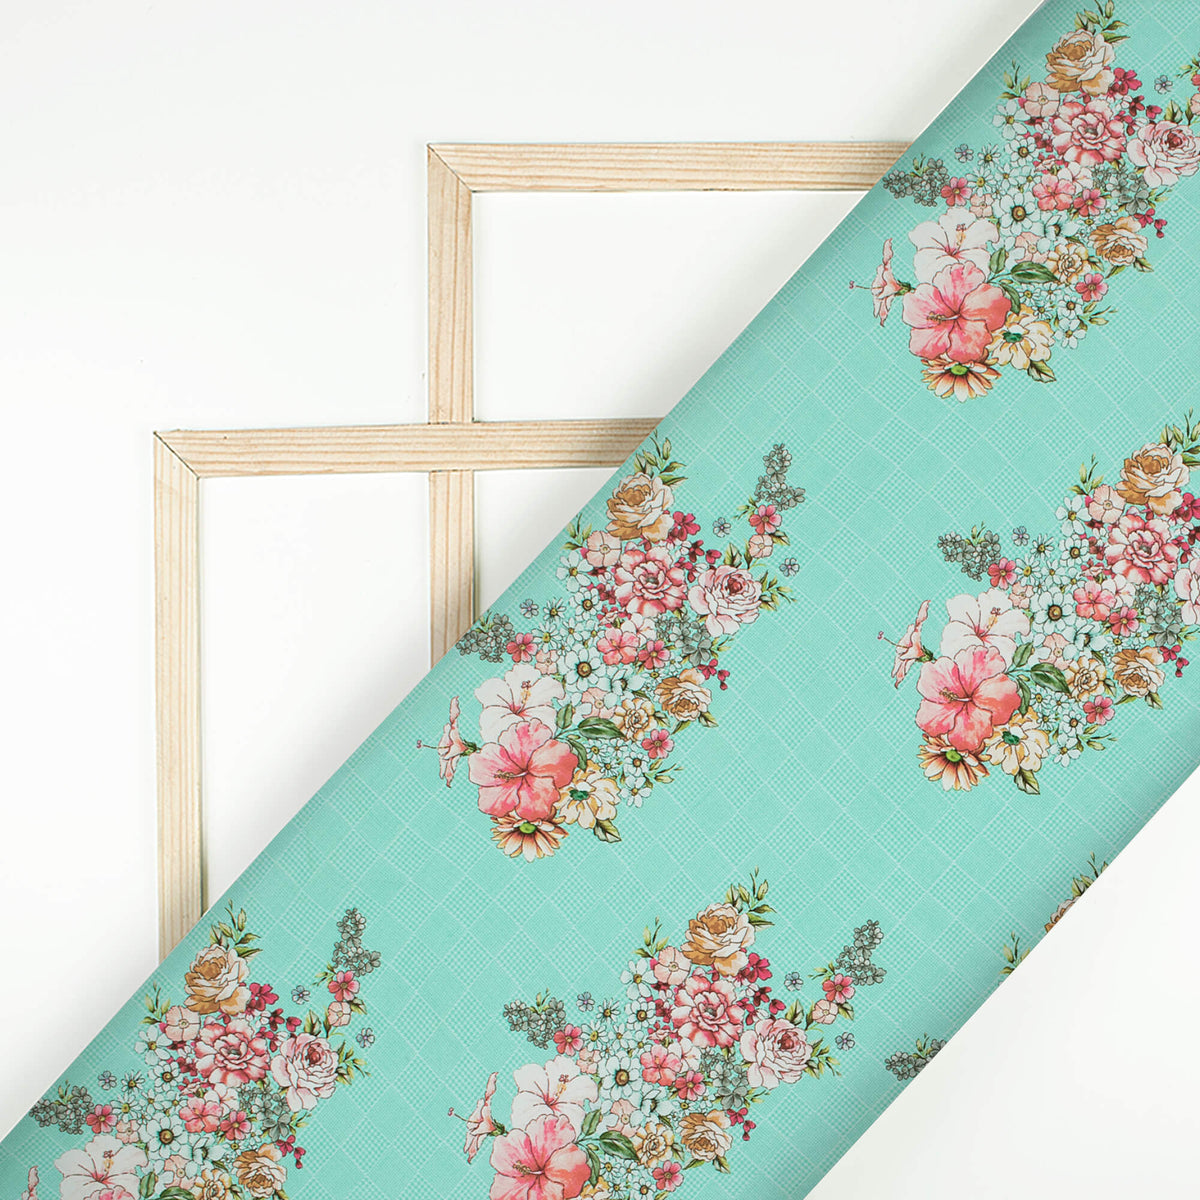 Turquoise Blue And Pink Floral Pattern Digital Print Crepe Silk Fabric